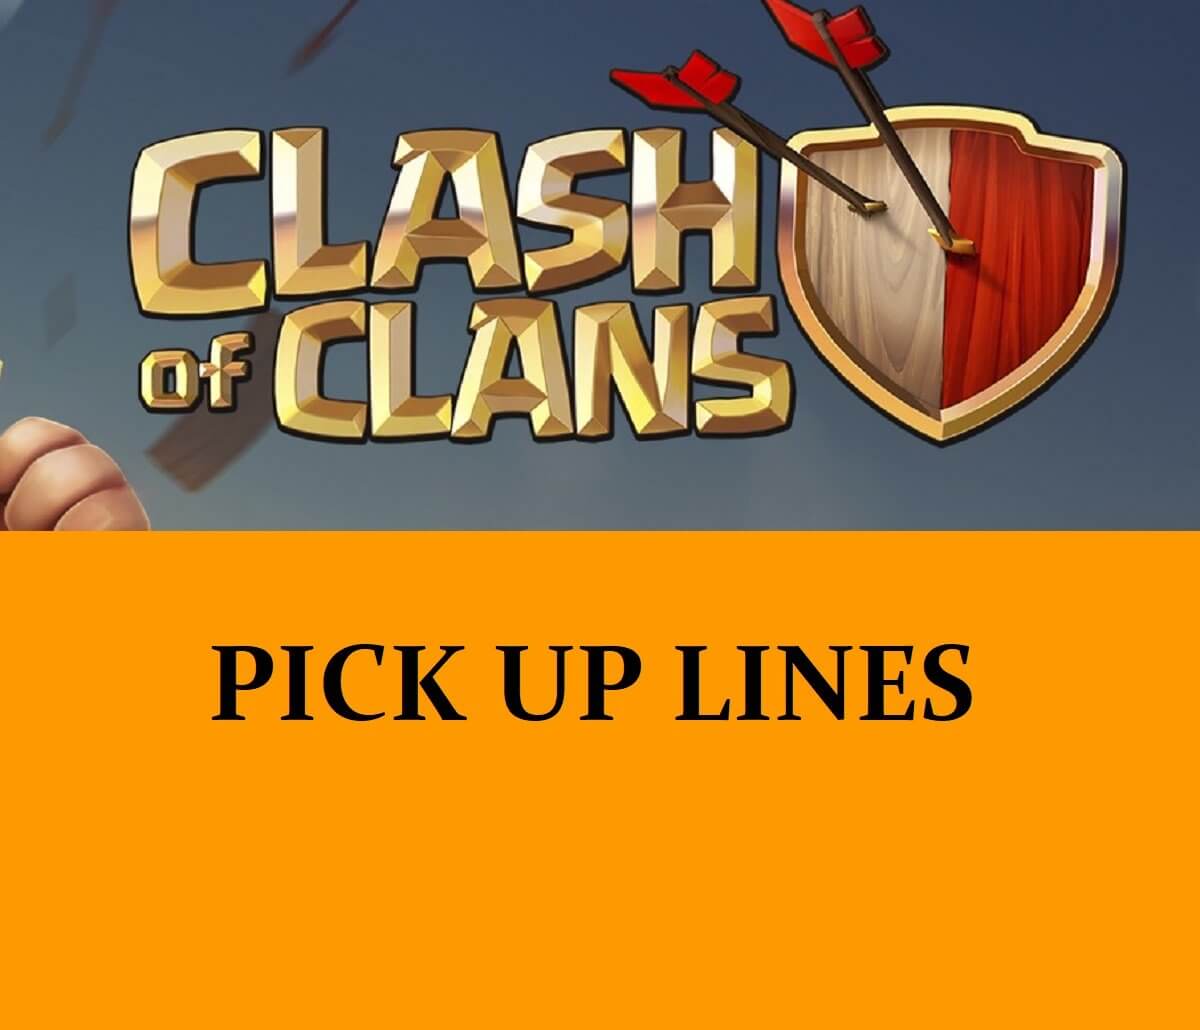 41 Clash Of Clans Pick Up Lines Flirt And Score With Best Puns